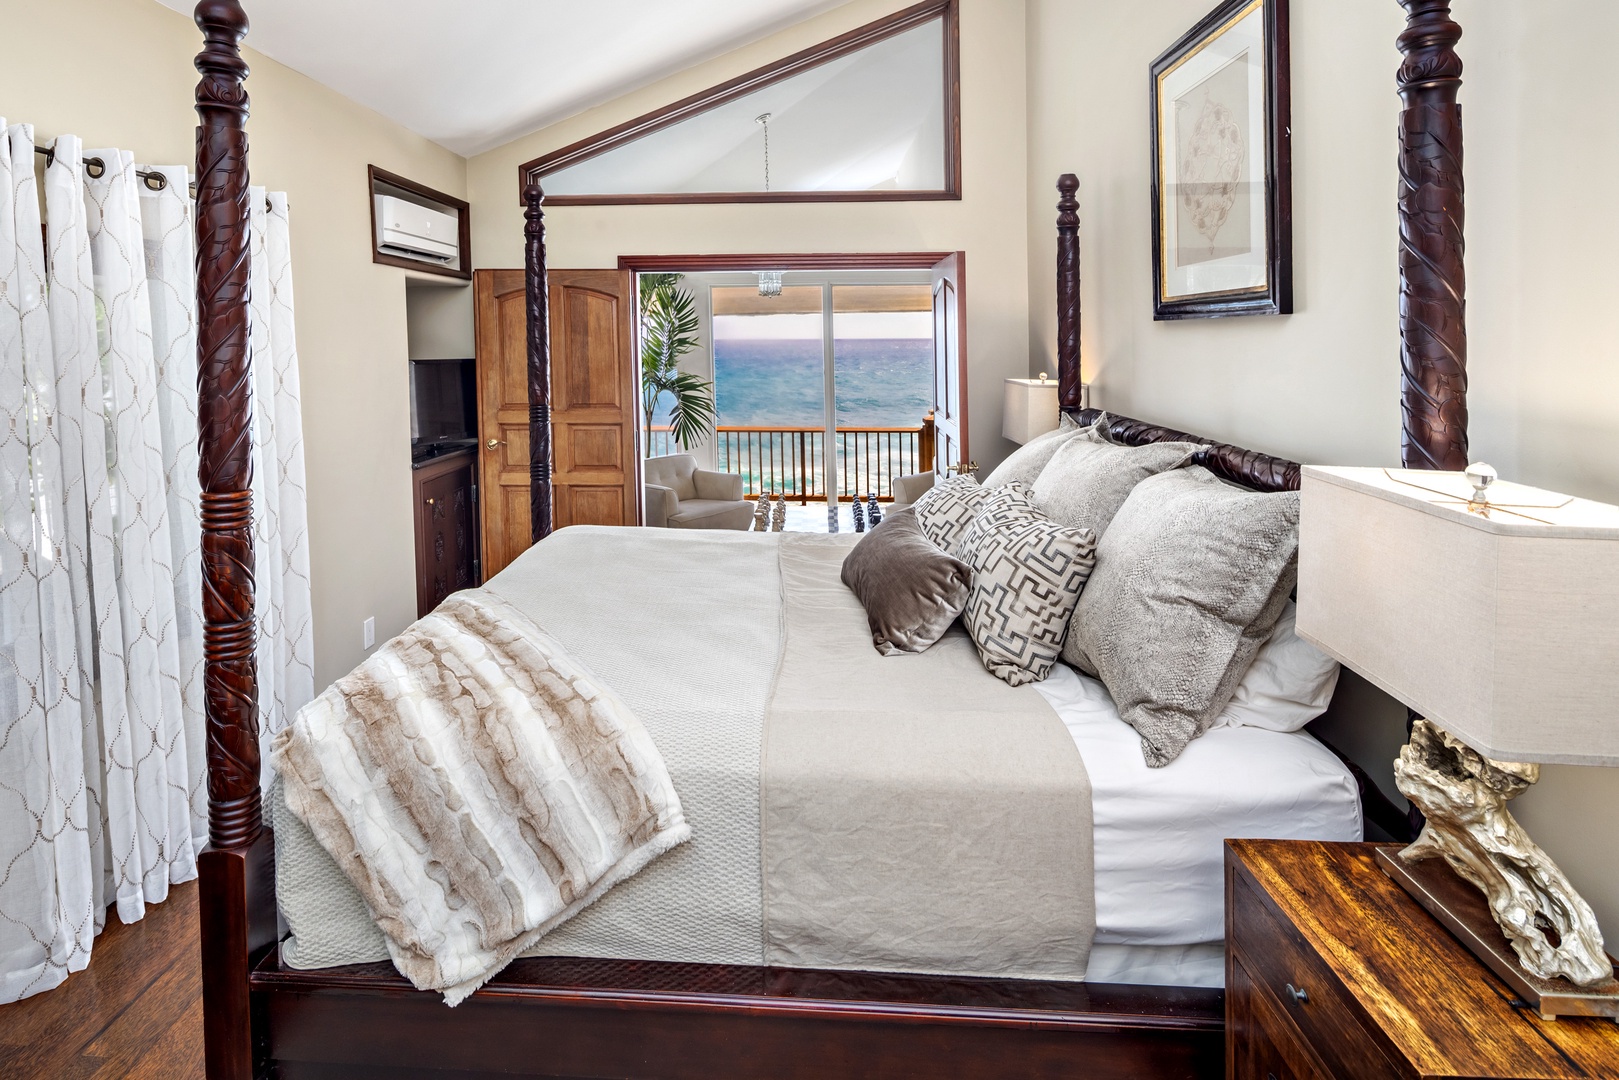 Honolulu Vacation Rentals, Kaiko'o Villa** - Ocean view from the third bedroom